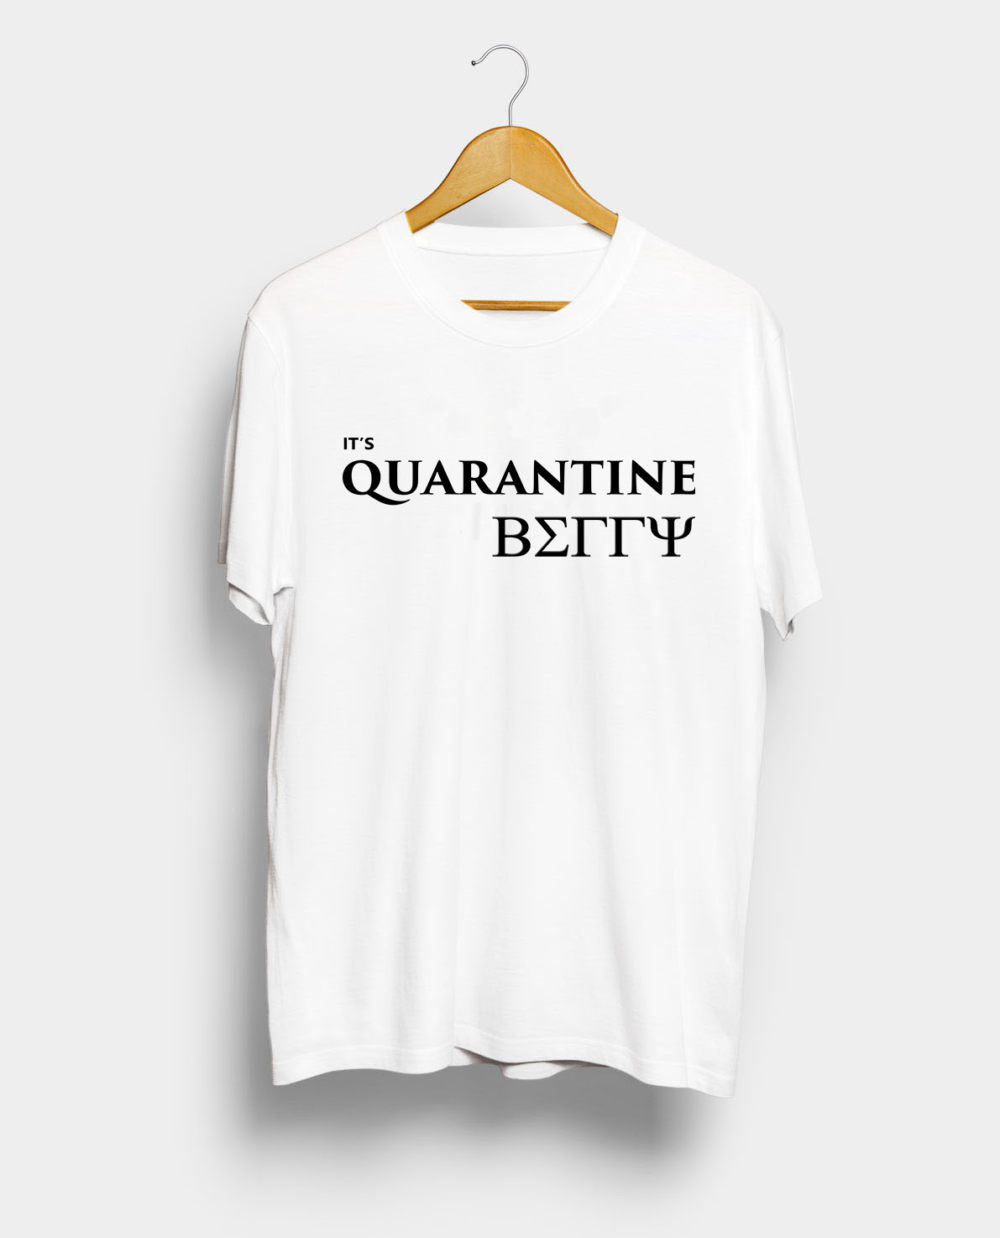 It's Quarantine Belly Graphic Printed T shirt